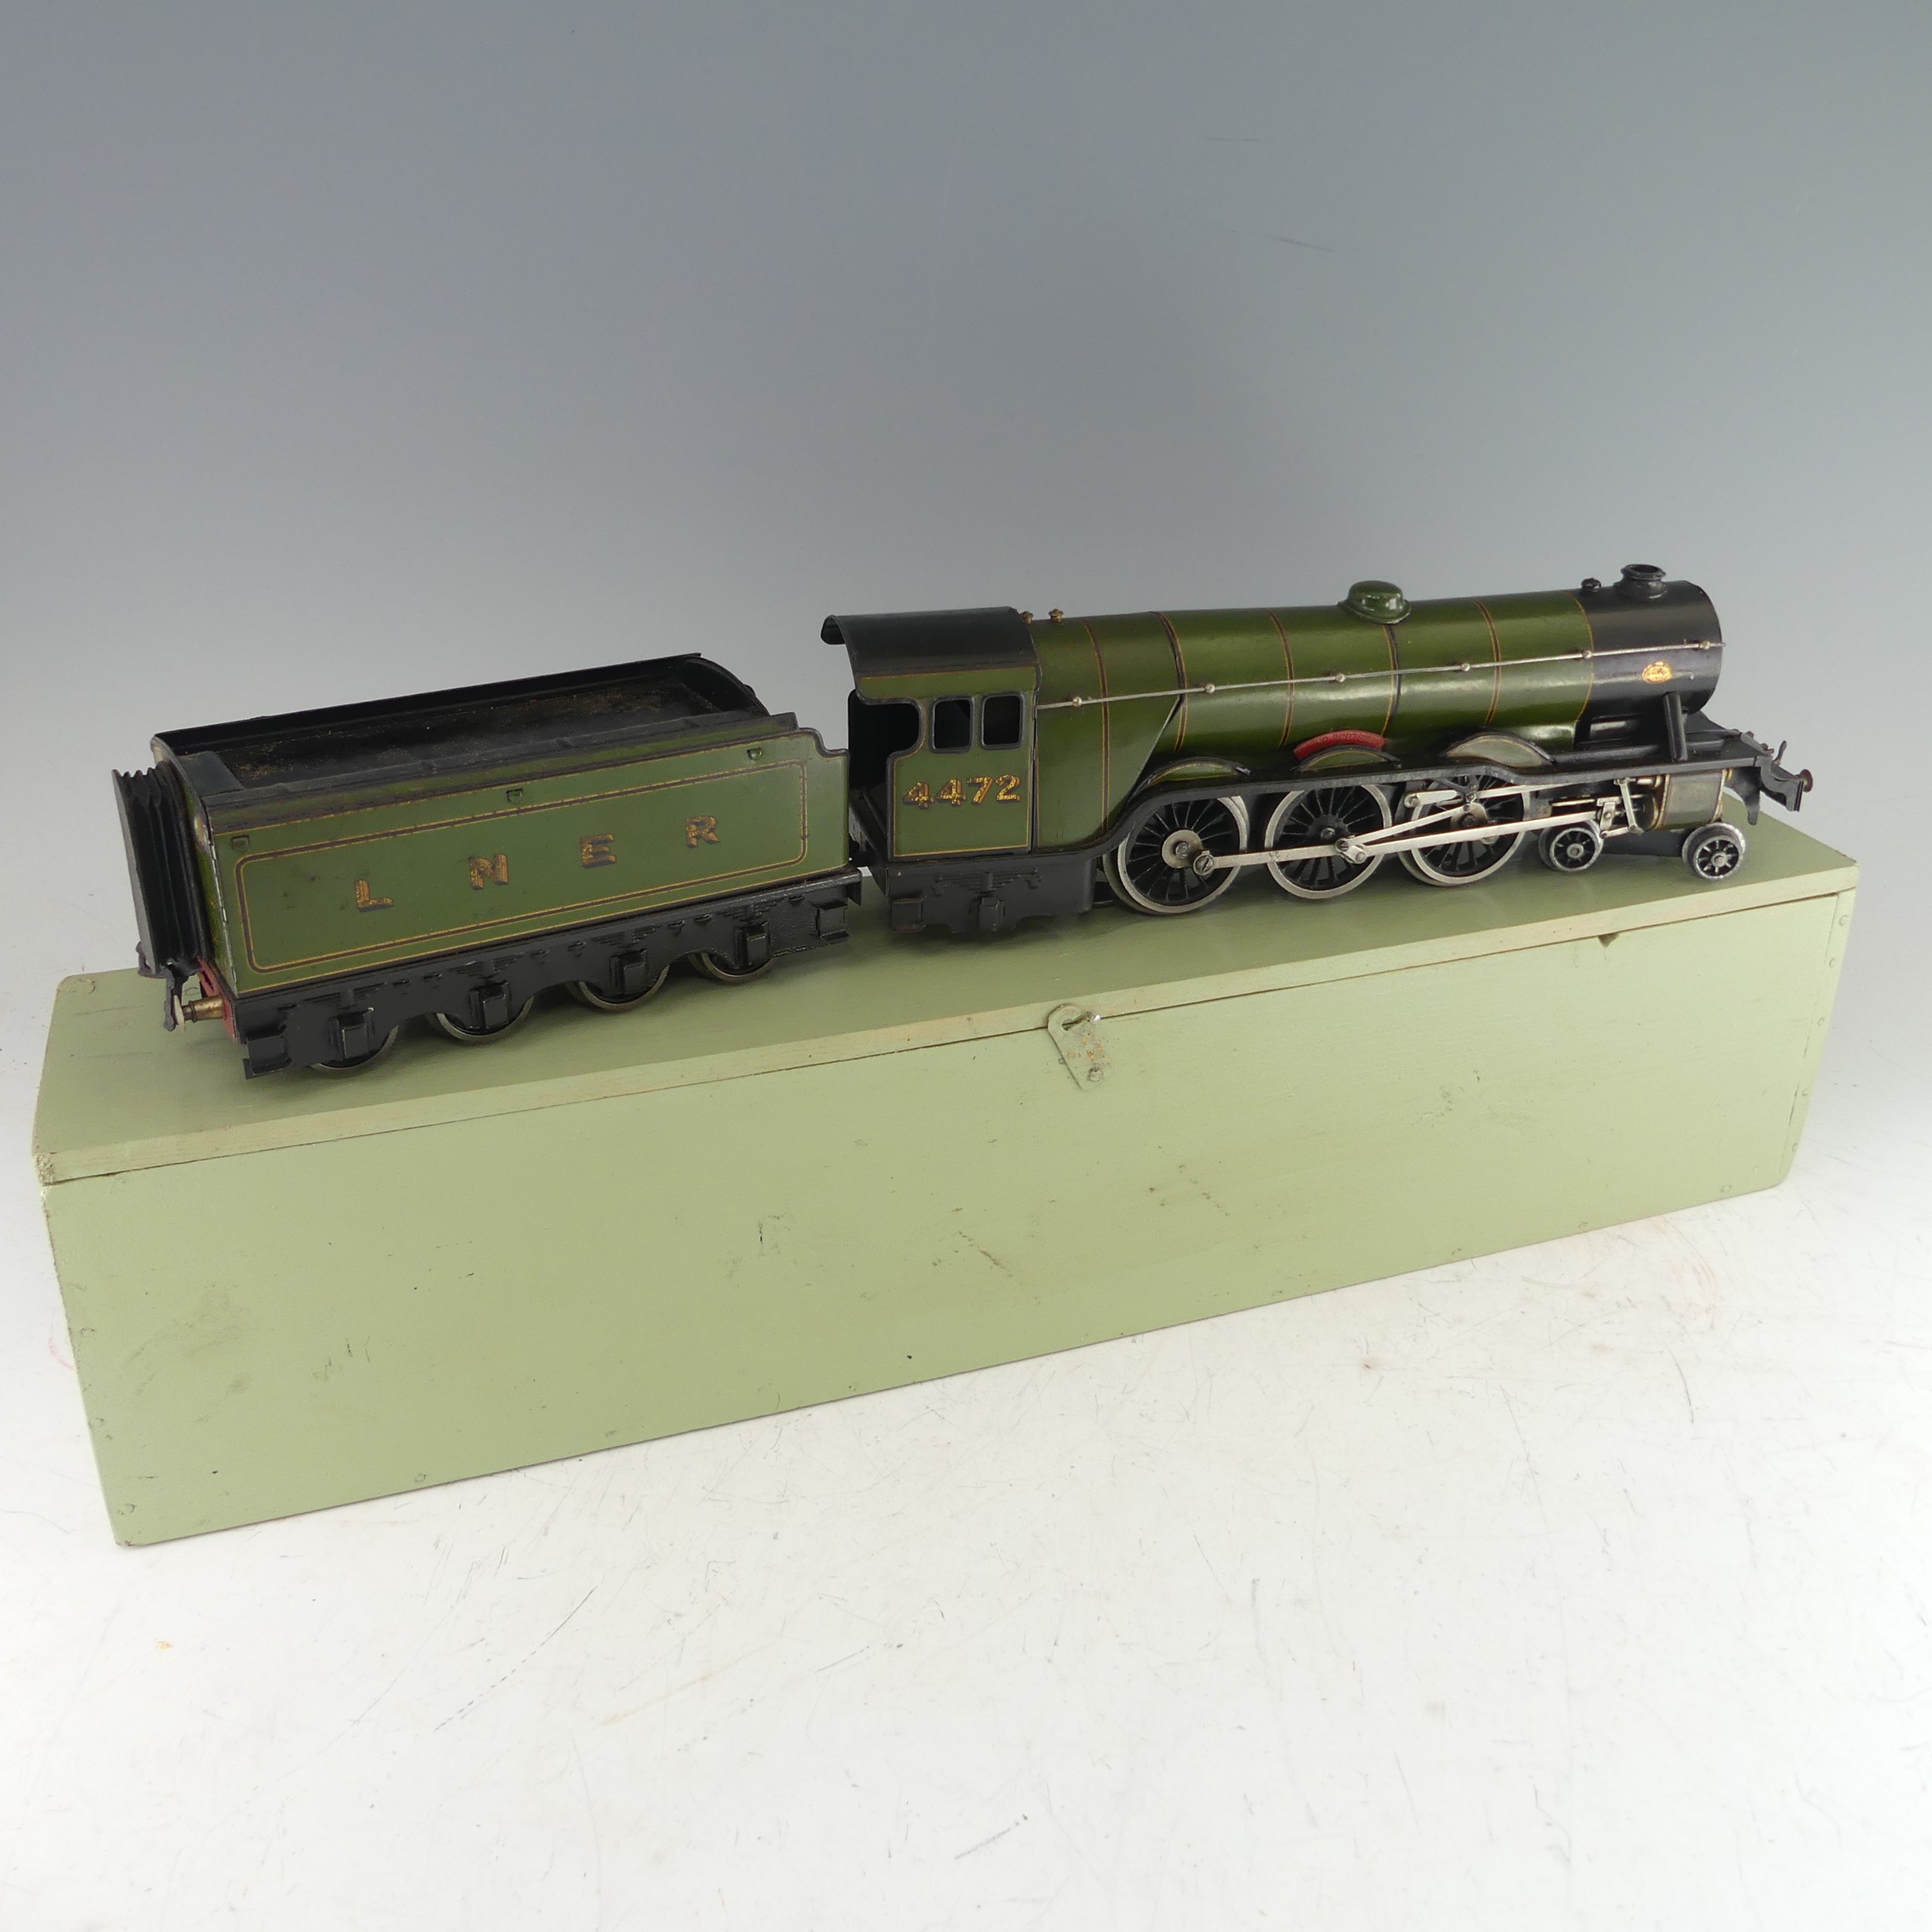 A quantity of '00' gauge plastic and card track and trackside accessories and buildings kits, - Image 12 of 18